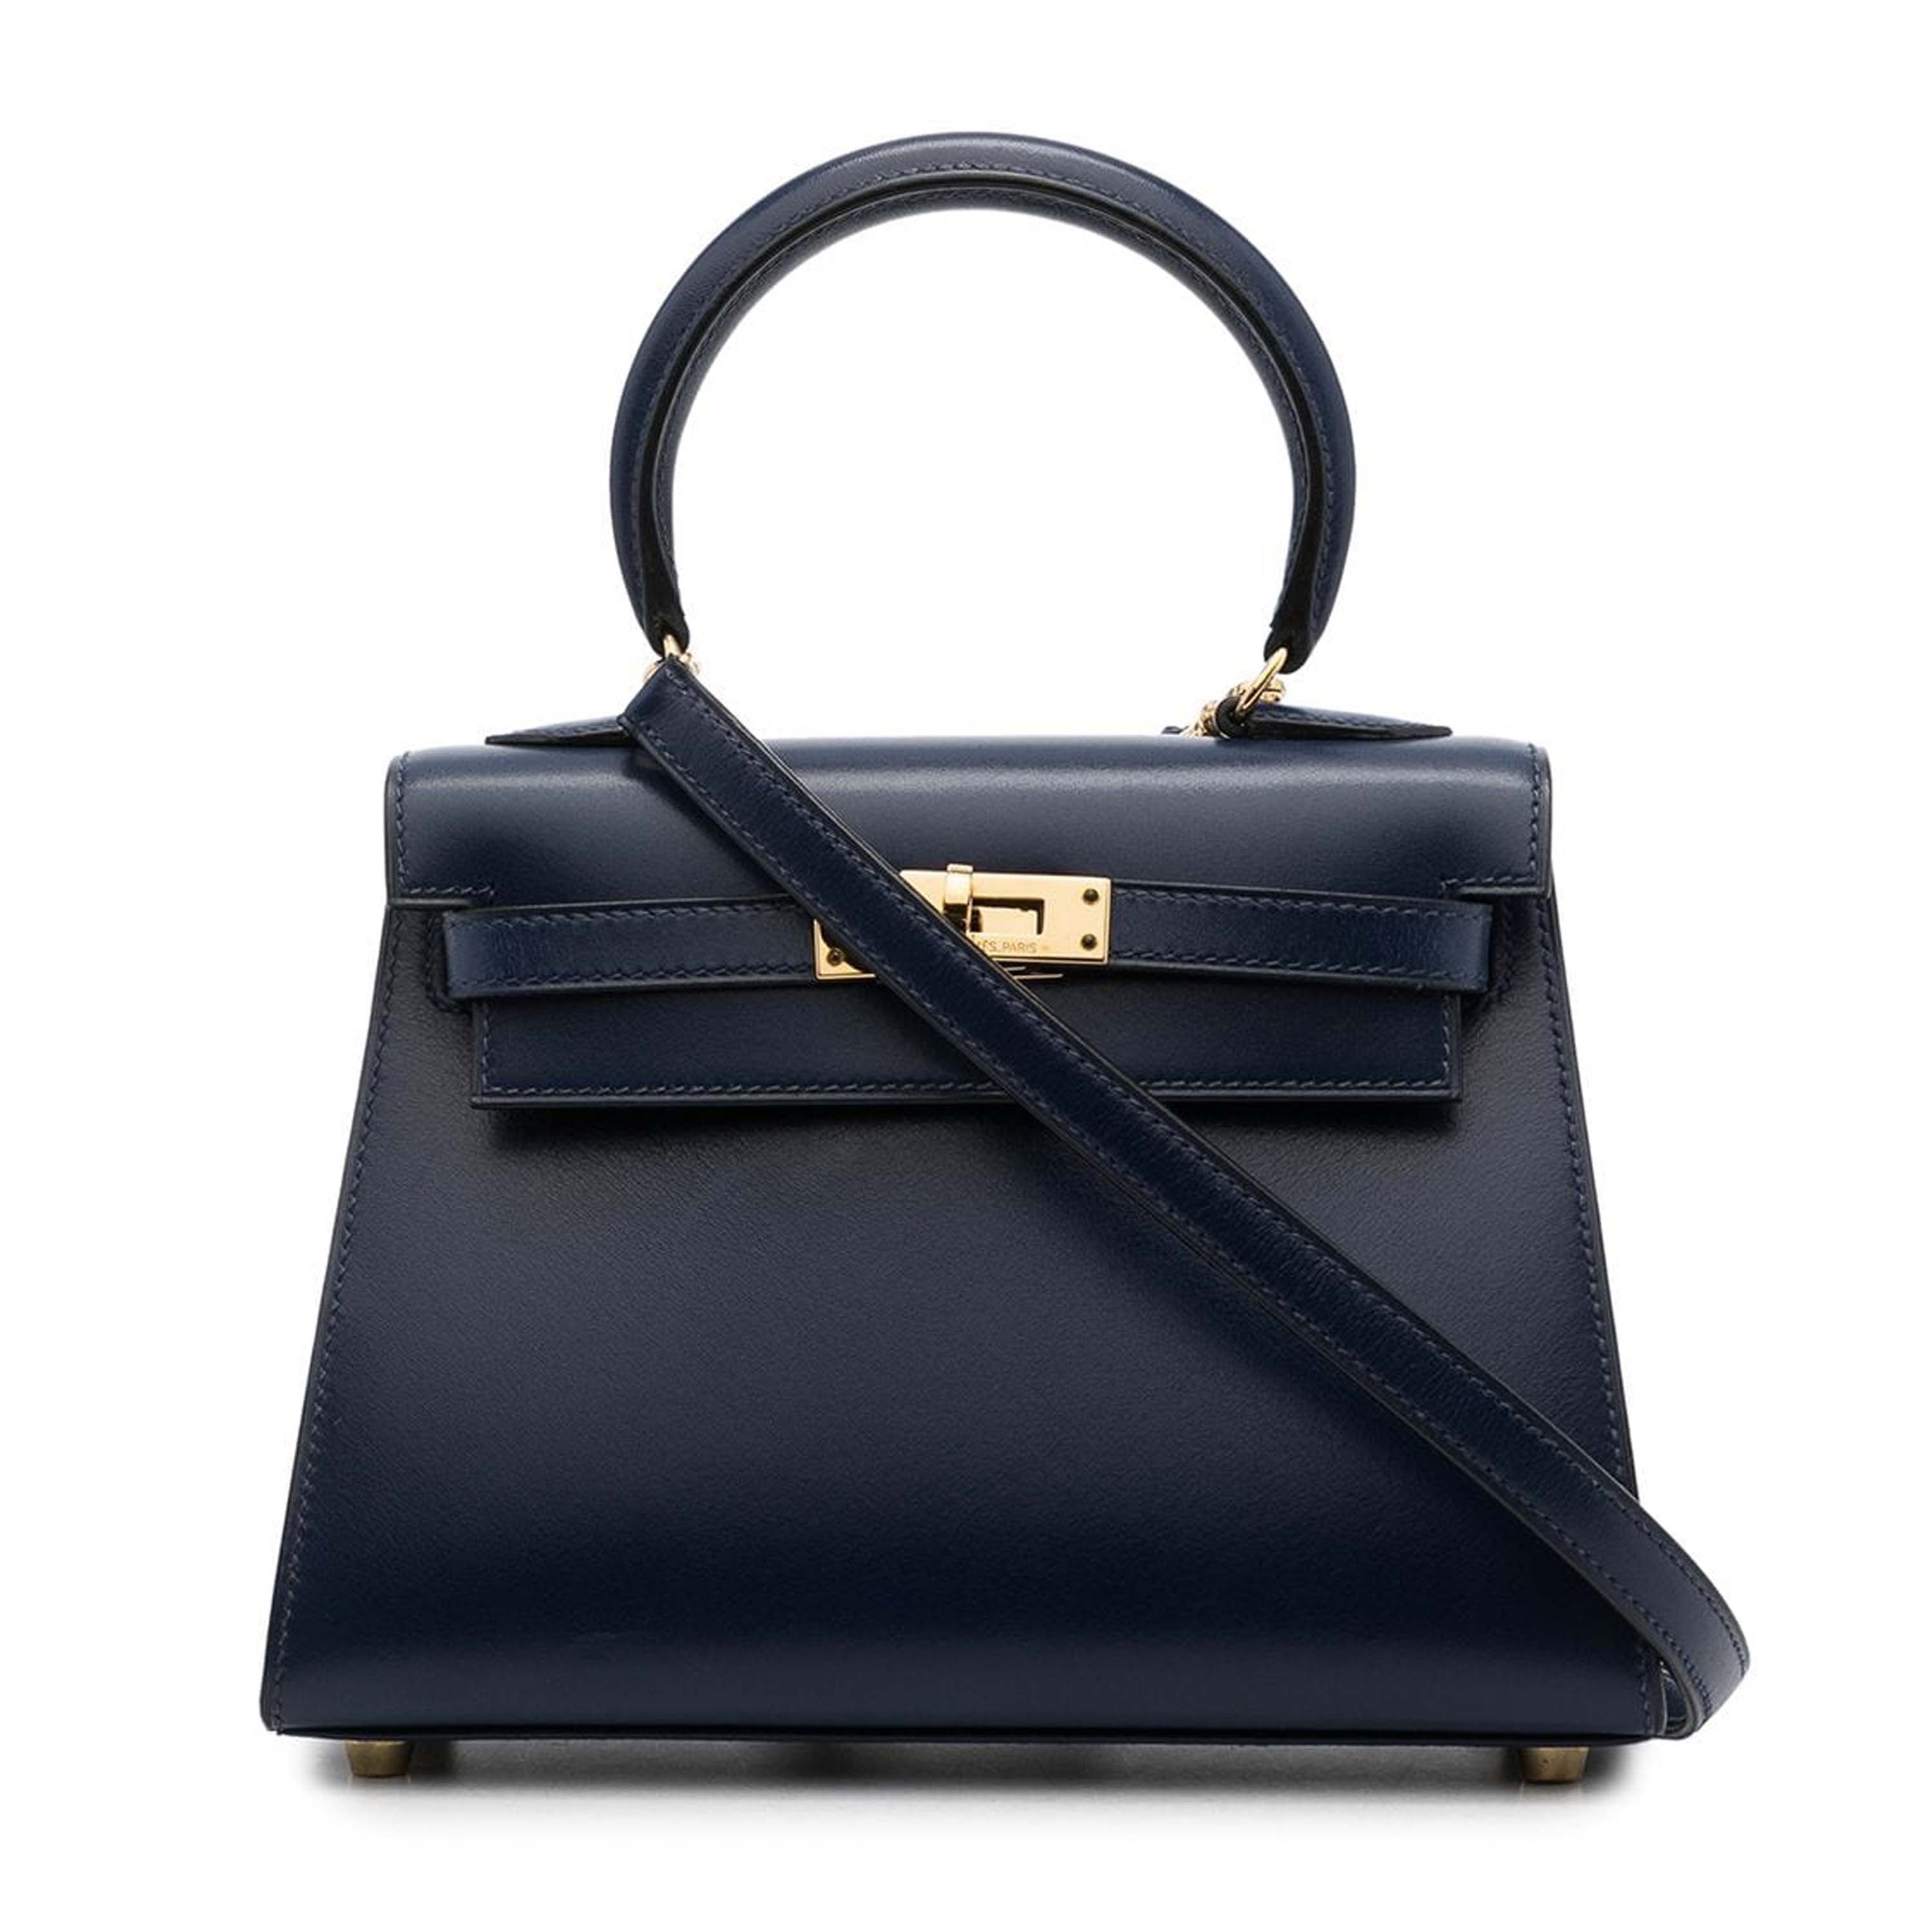 9 Iconic Bags And The Brilliant Women Who Inspired Them